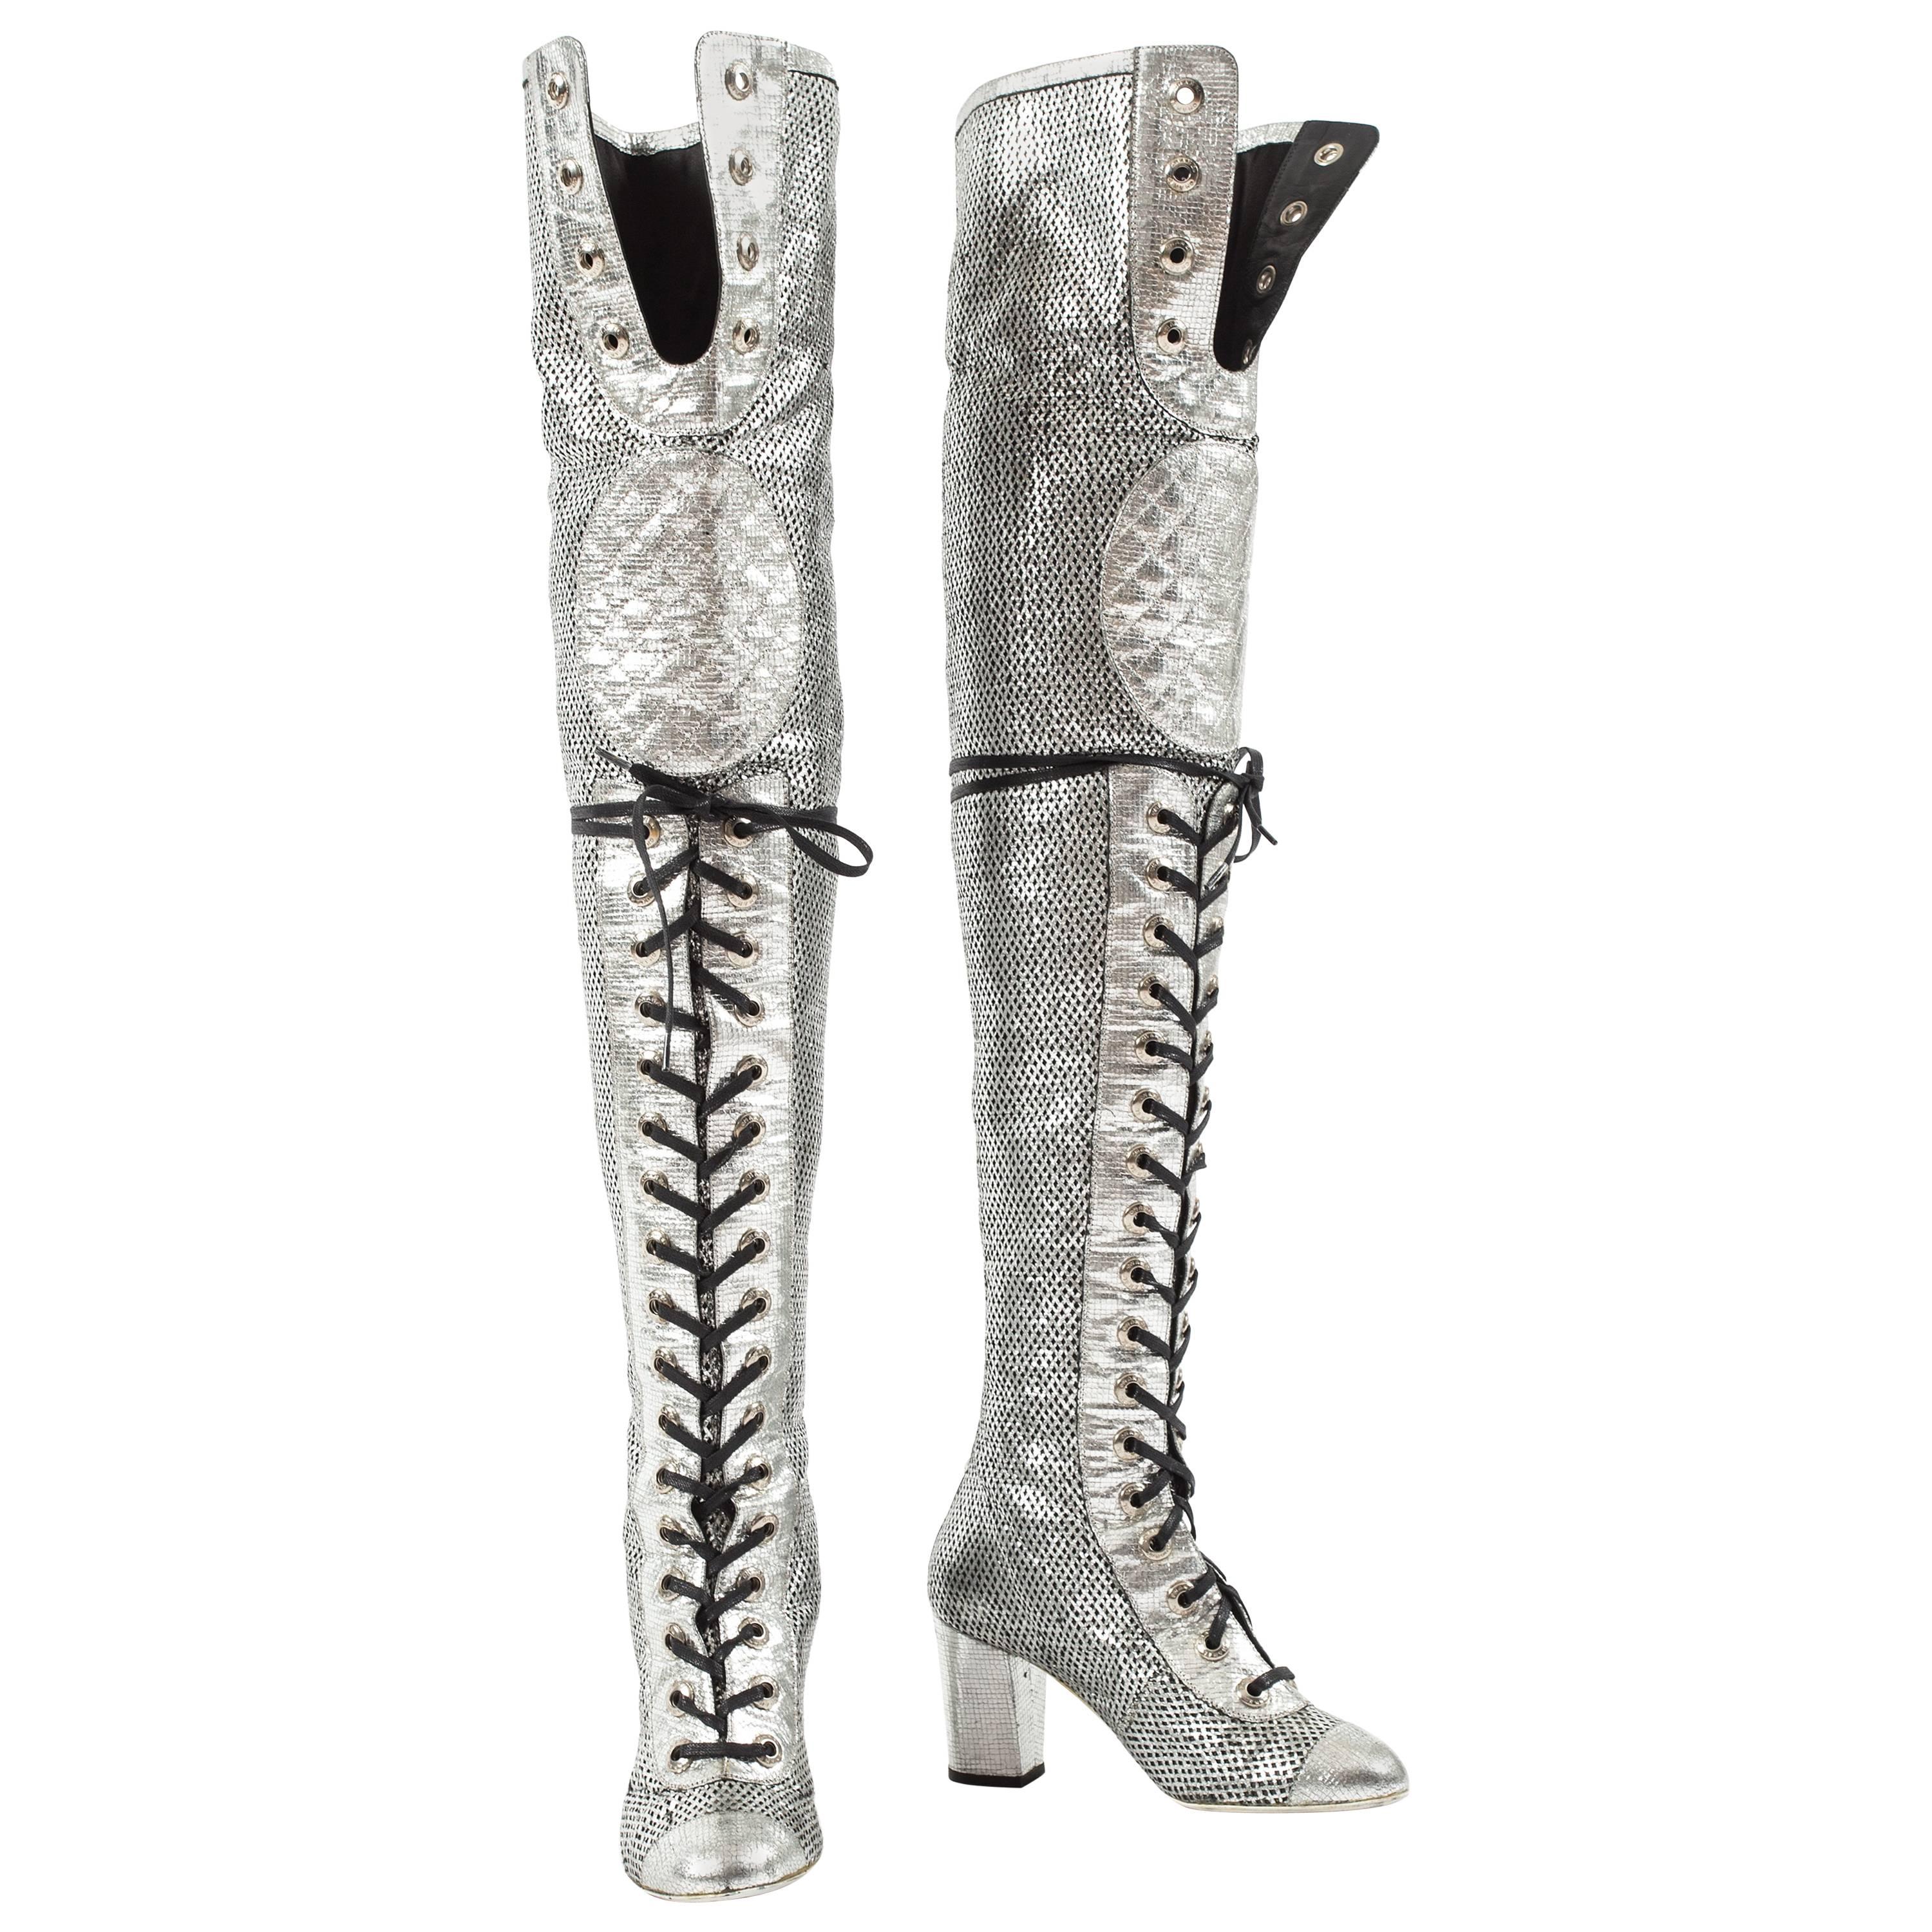 CHANEL 18B Laminated Leather Metal Heel Ankle City Boots Booties Silver  $1200